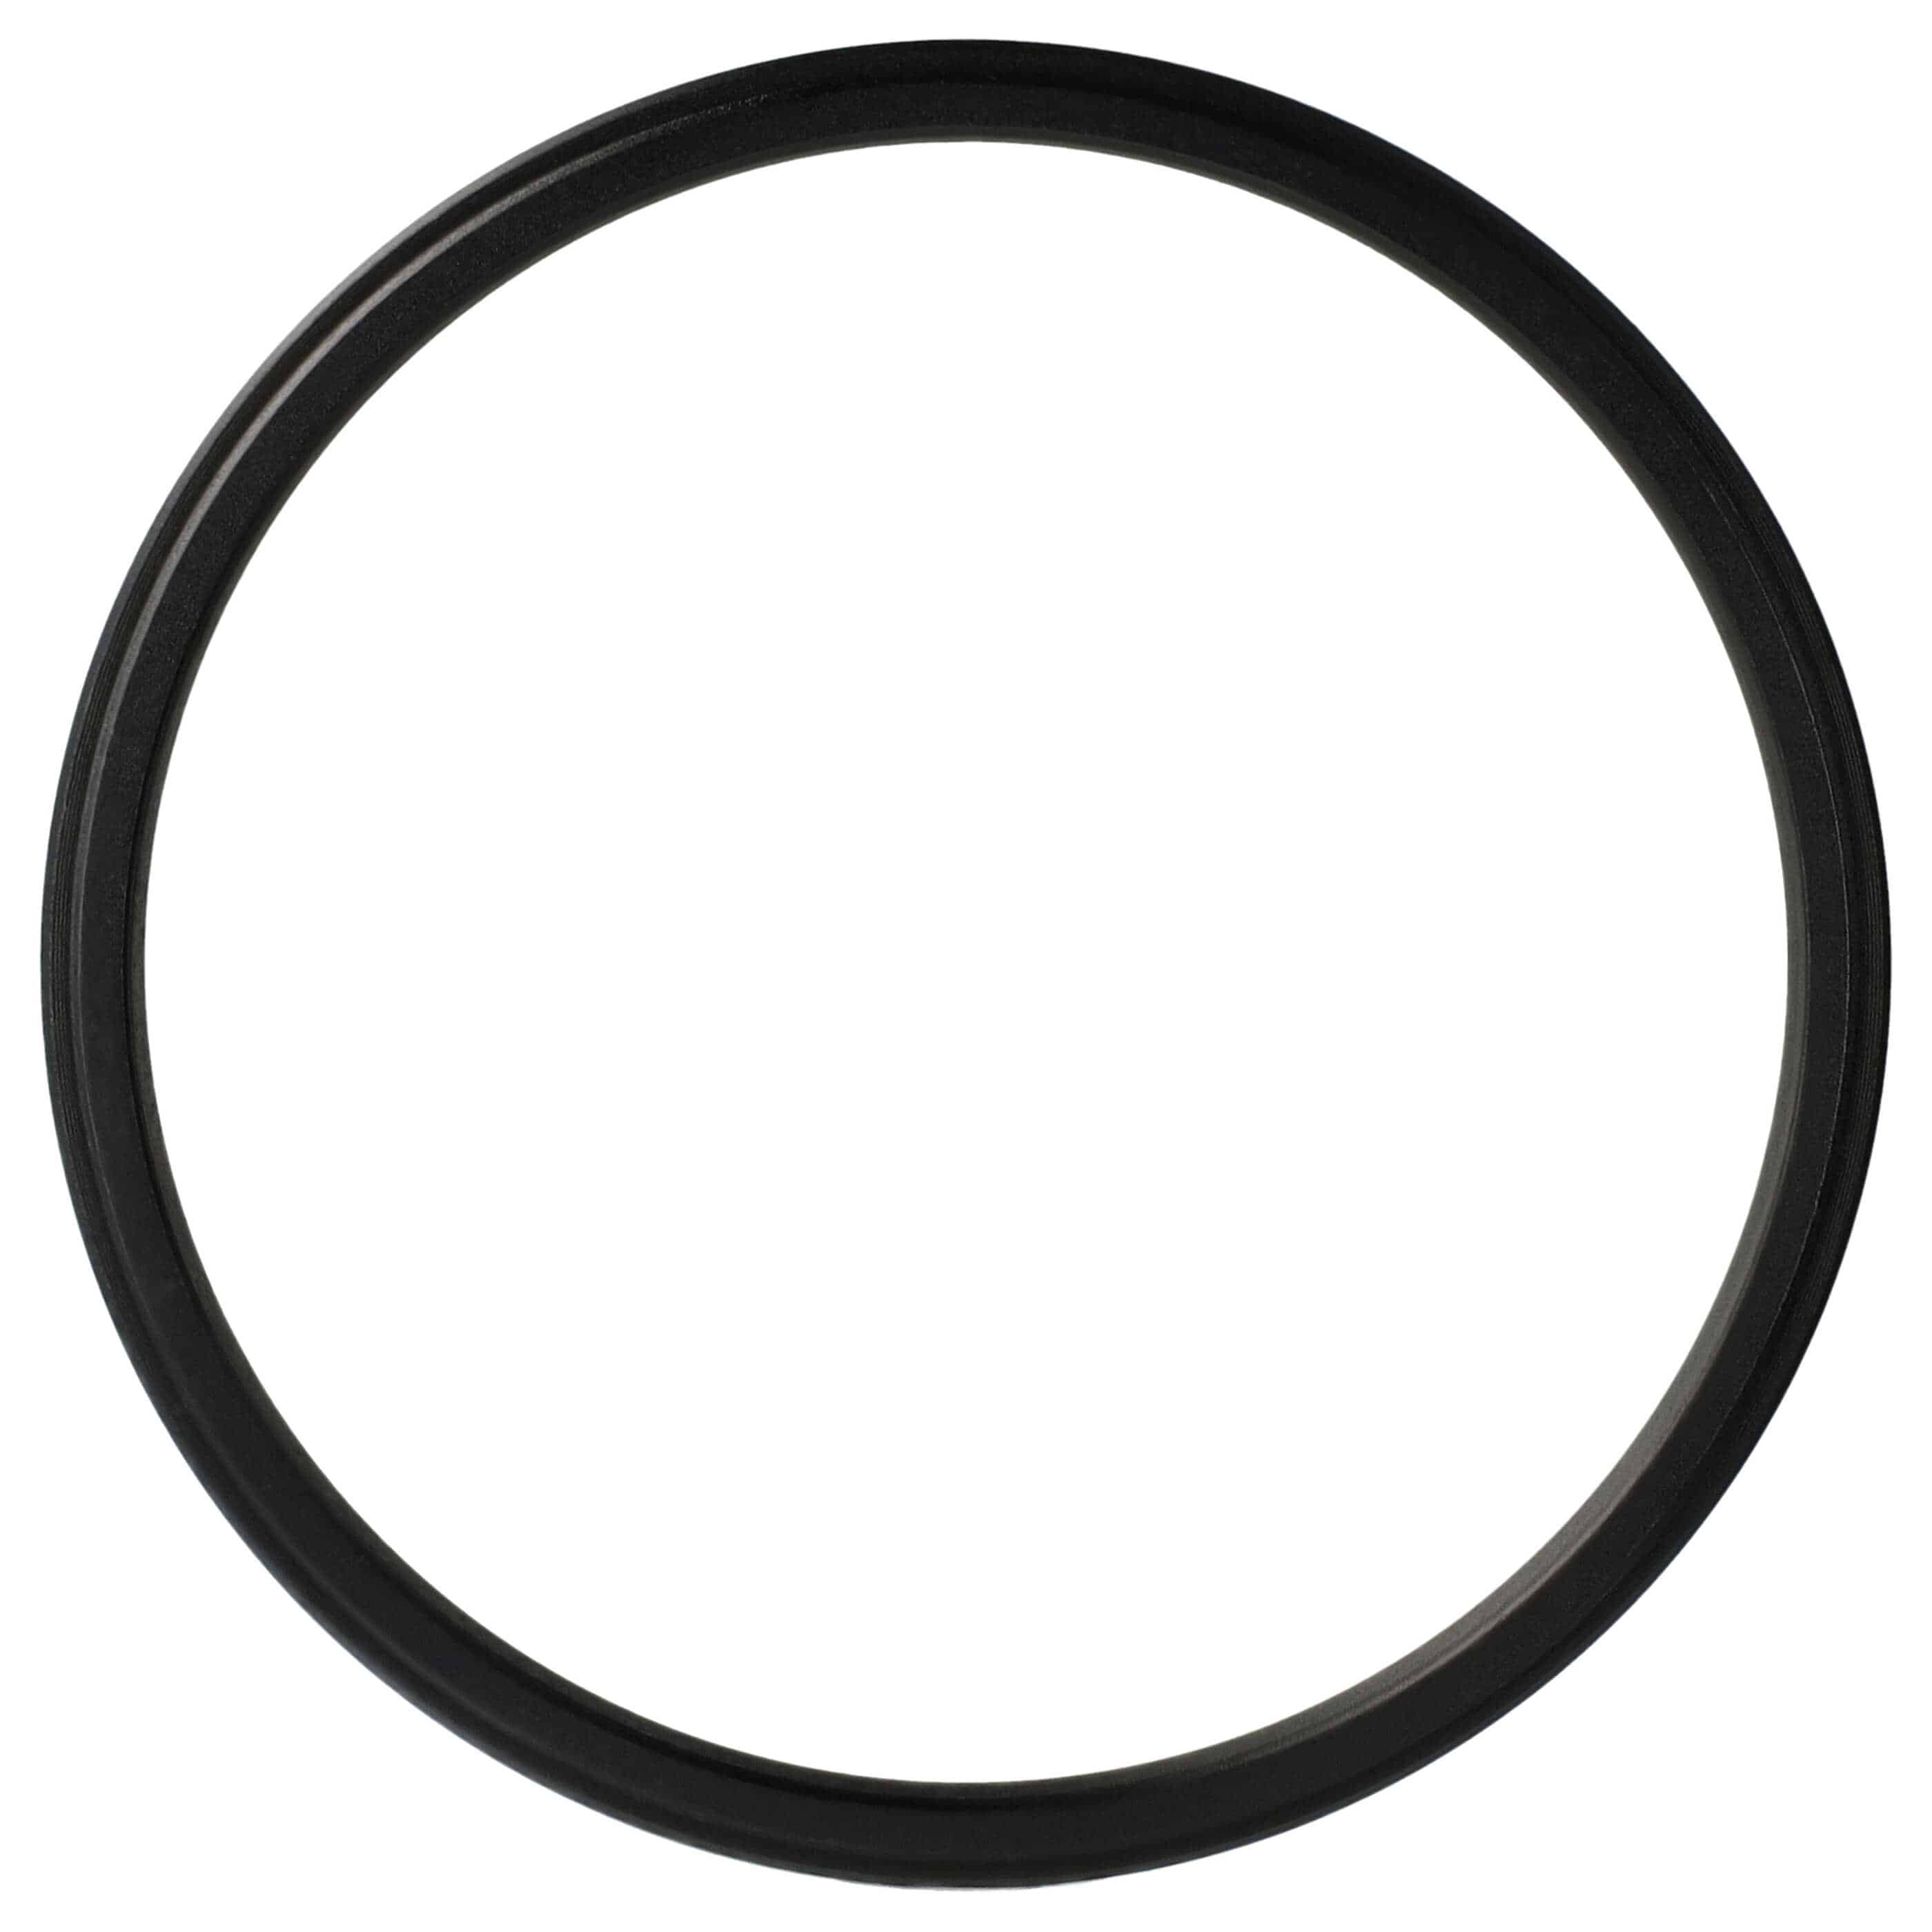 Step-Down Ring Adapter from 72 mm to 67 mm for various Camera Lenses